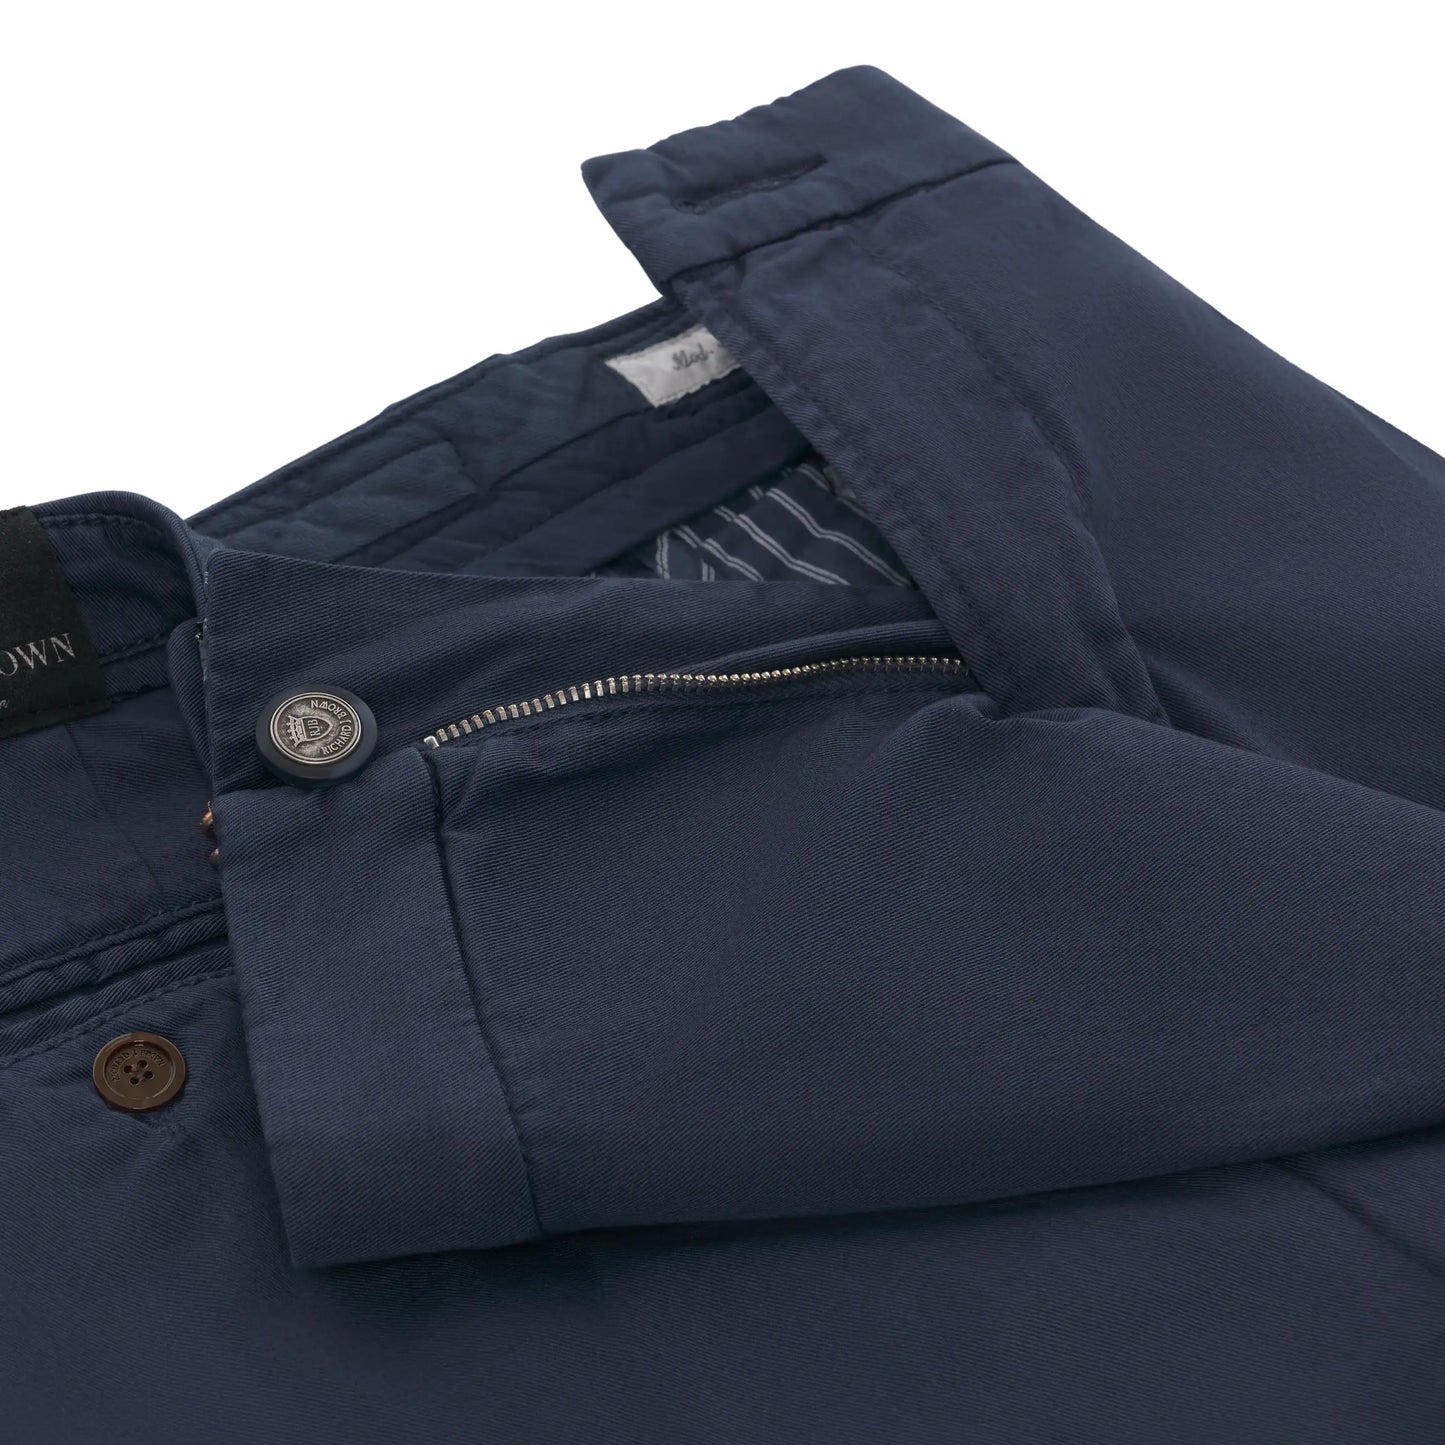 Slim-Fit Cotton Pleated Trousers in Navy